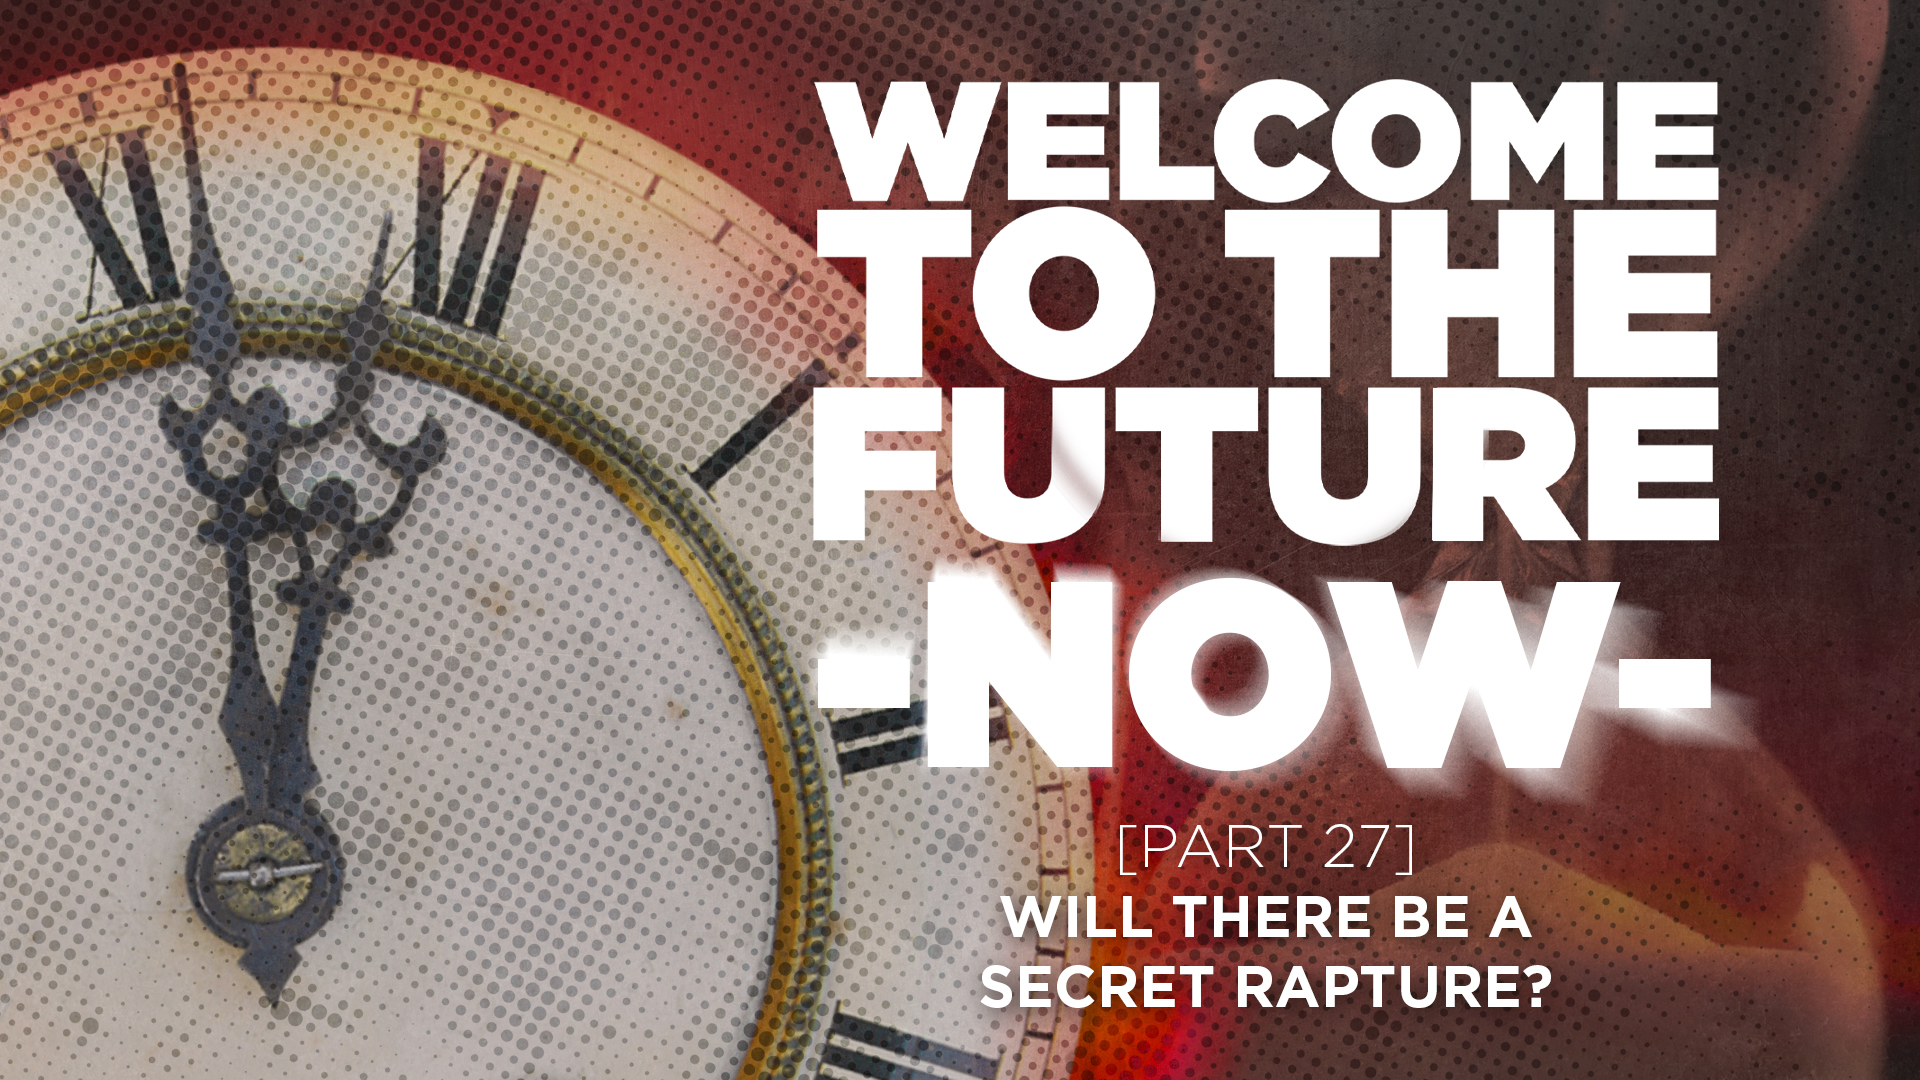 Part 27: Will There Be A Secret Rapture?